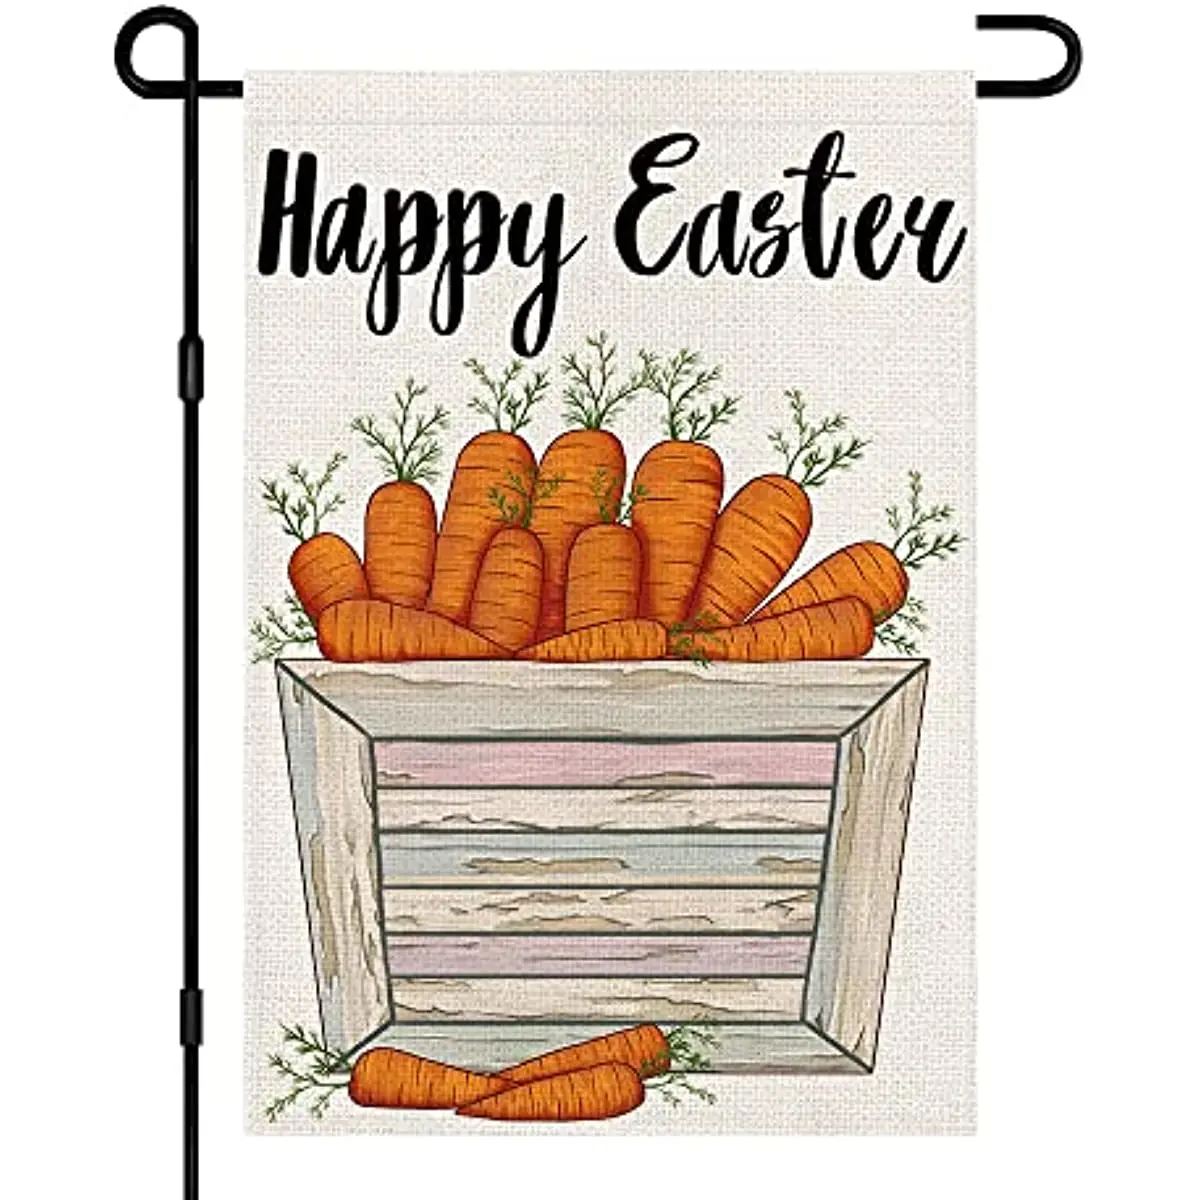 

Happy Easter Carrot Garden Flag 12x18 Inch Burlap Double Sided Outside, Easter Sign Yard Outdoor Decoration Flags Banner